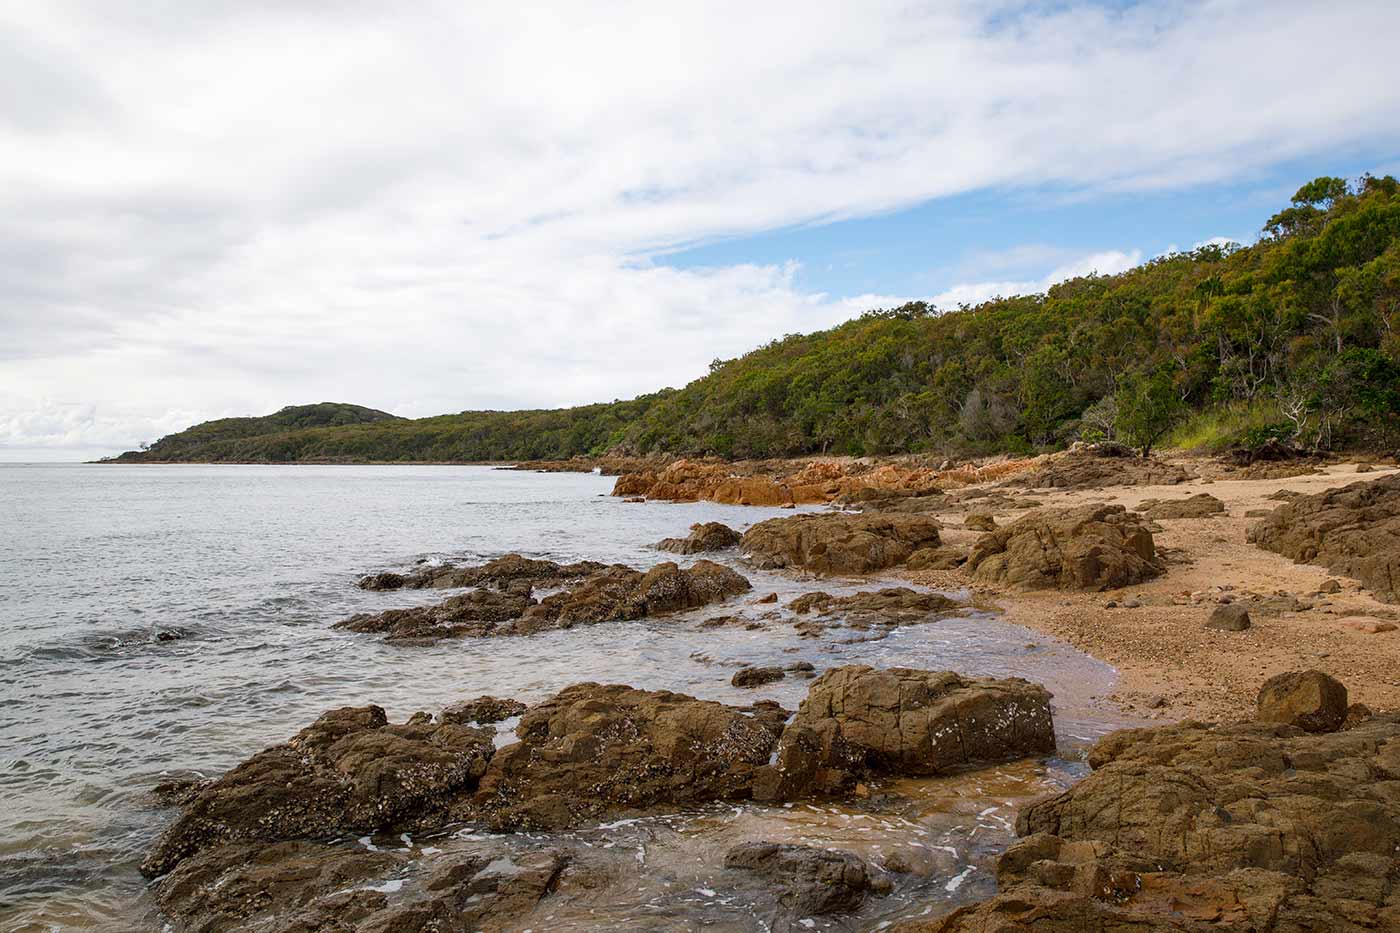 Colour photo of a cove with a rocky beach and vegetation stretching into the distance.